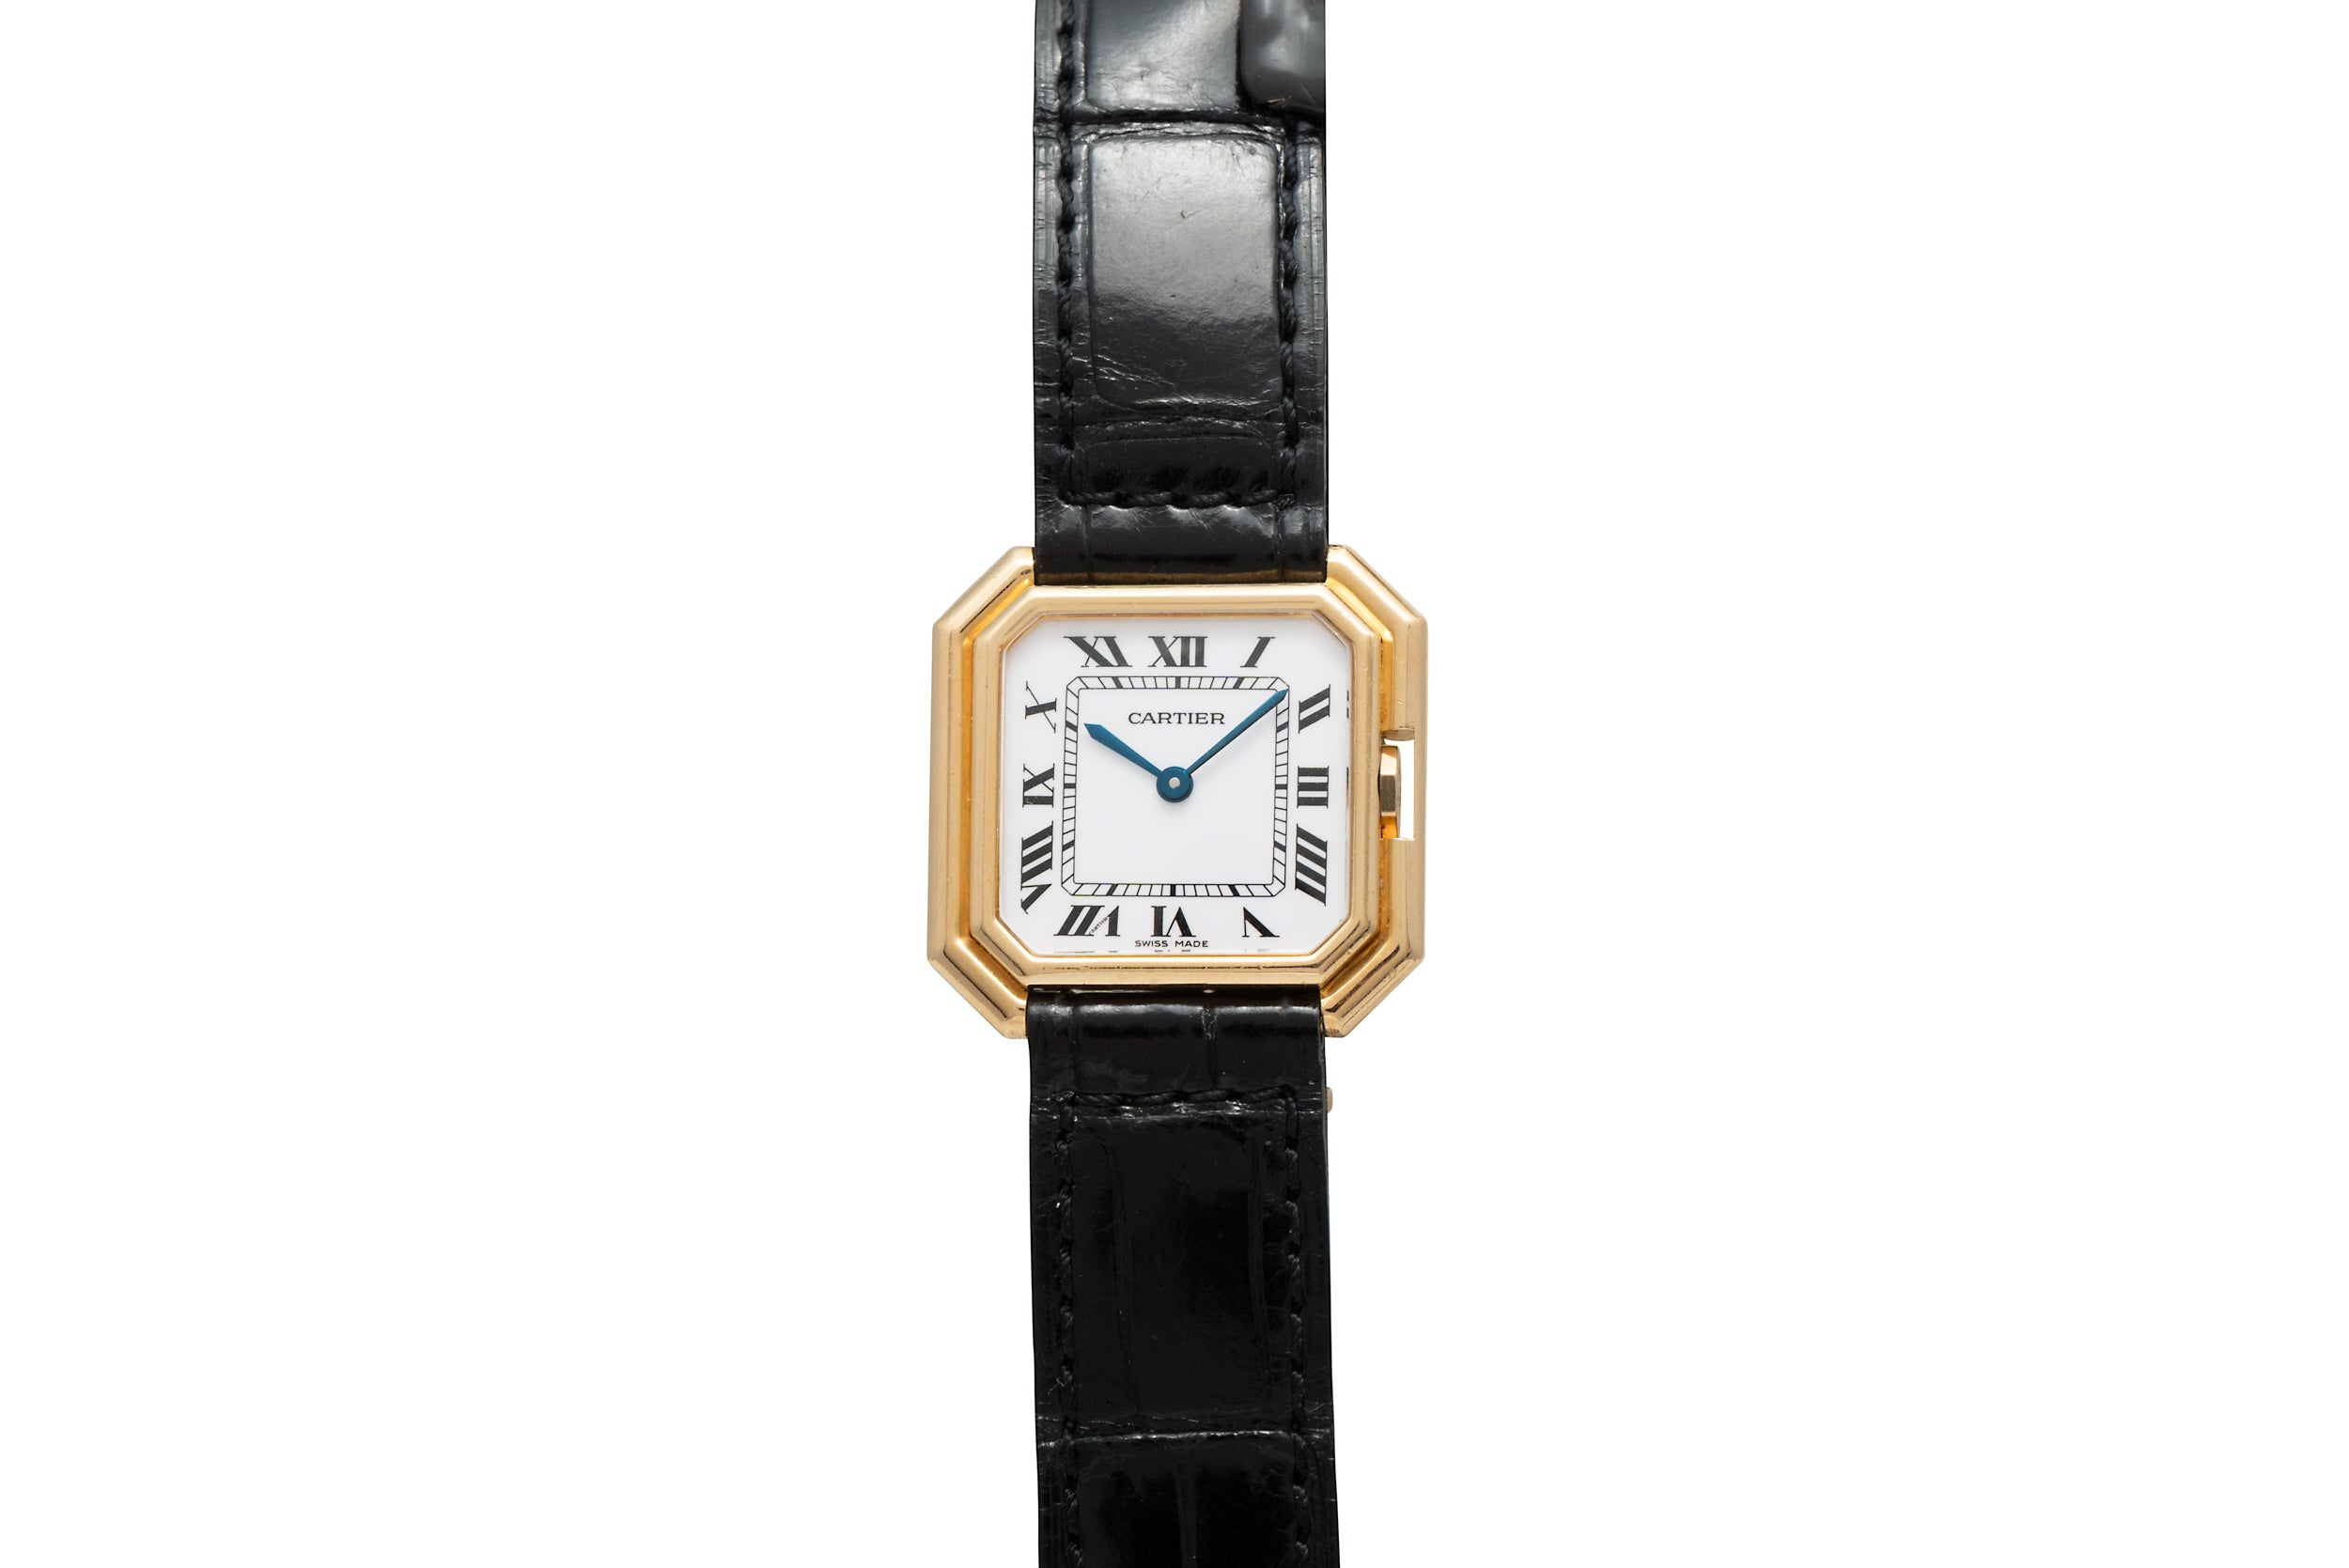 Neo-Vintage Watches – Analog:Shift